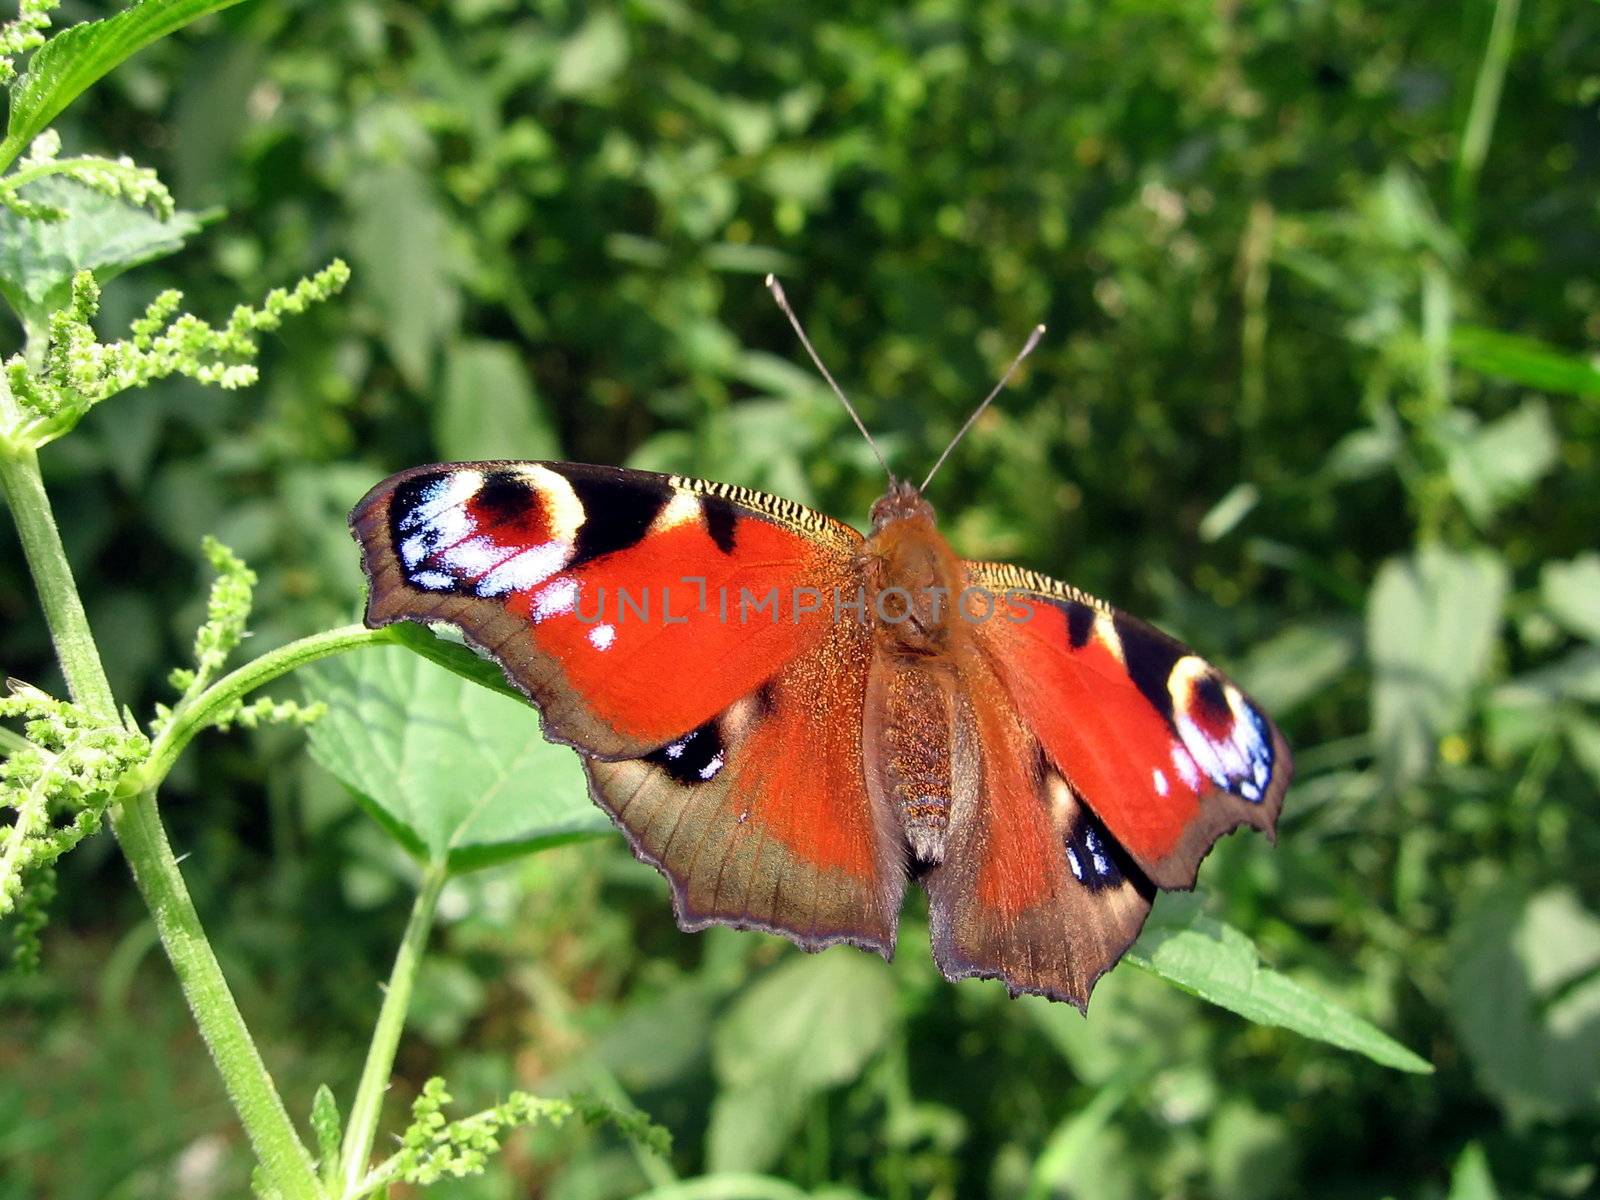 Beautiful peacock butterfly by tomatto